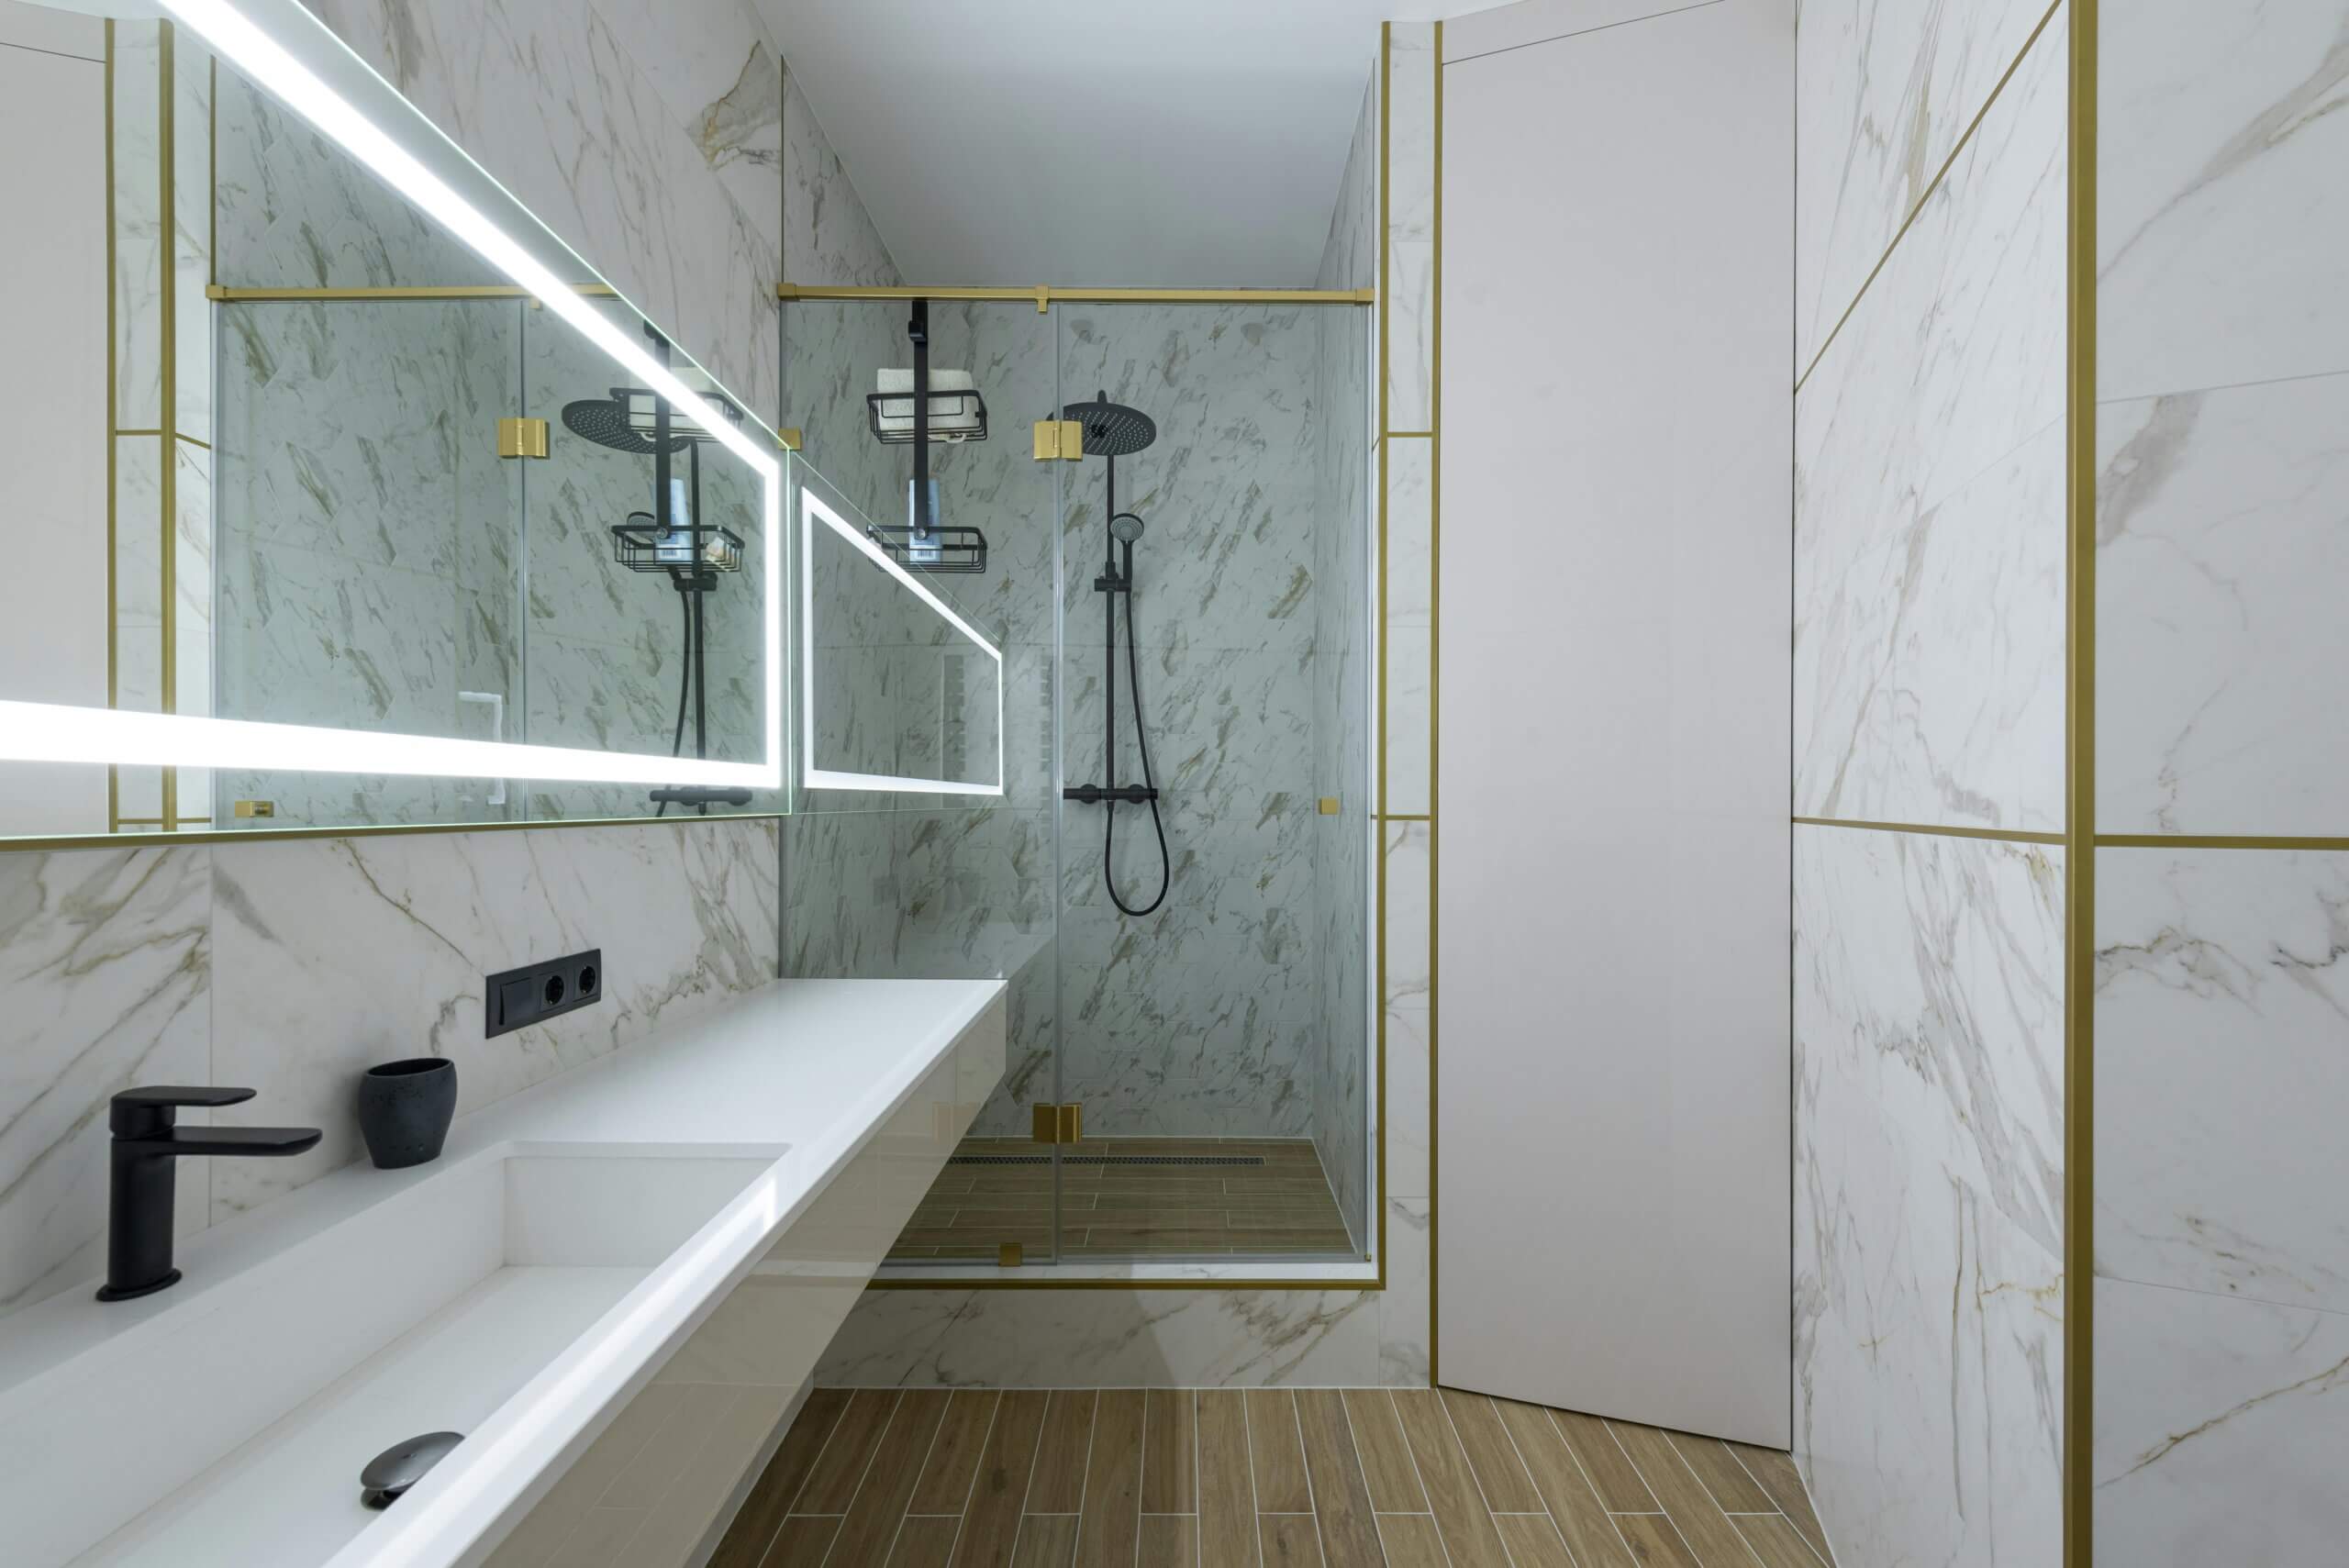 Modern bathroom shower with marble tiles